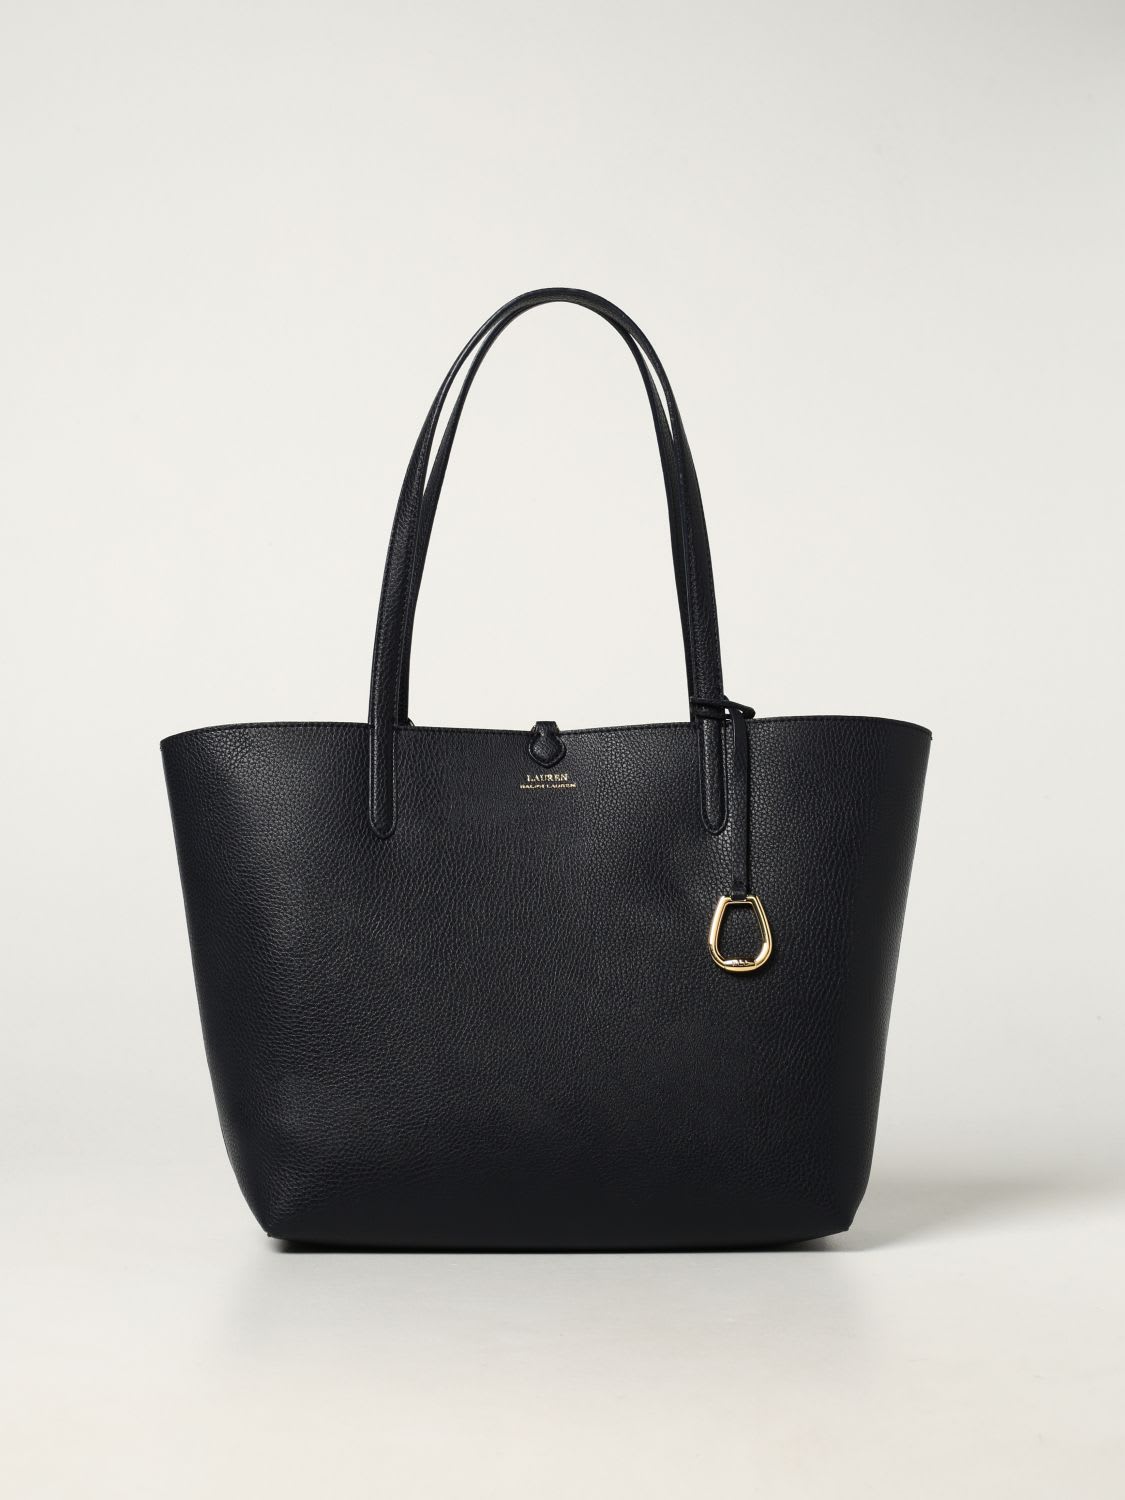 Lauren Ralph Lauren Tote Bags Lauren Ralph Lauren Bag In Synthetic Leather